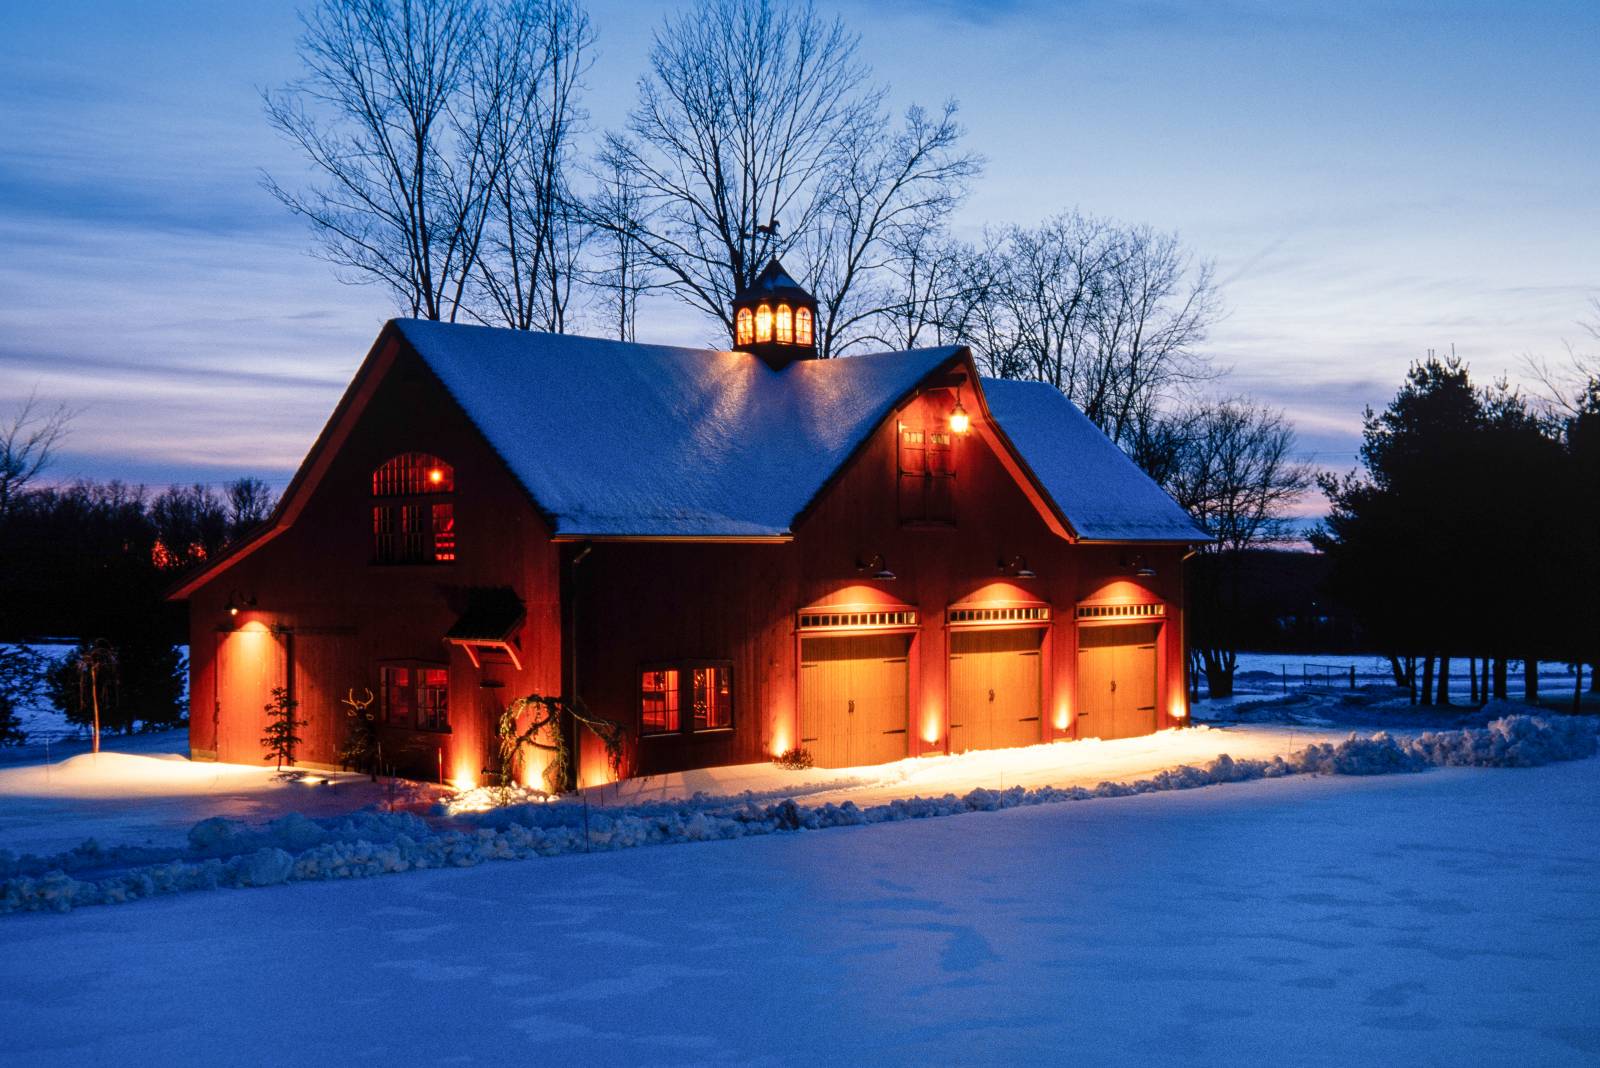 The post & beam Carriage Barn blanketed in snow welcomes with a warm glow after sunset in this peaceful wintry scene in the countryside of Ellington CT